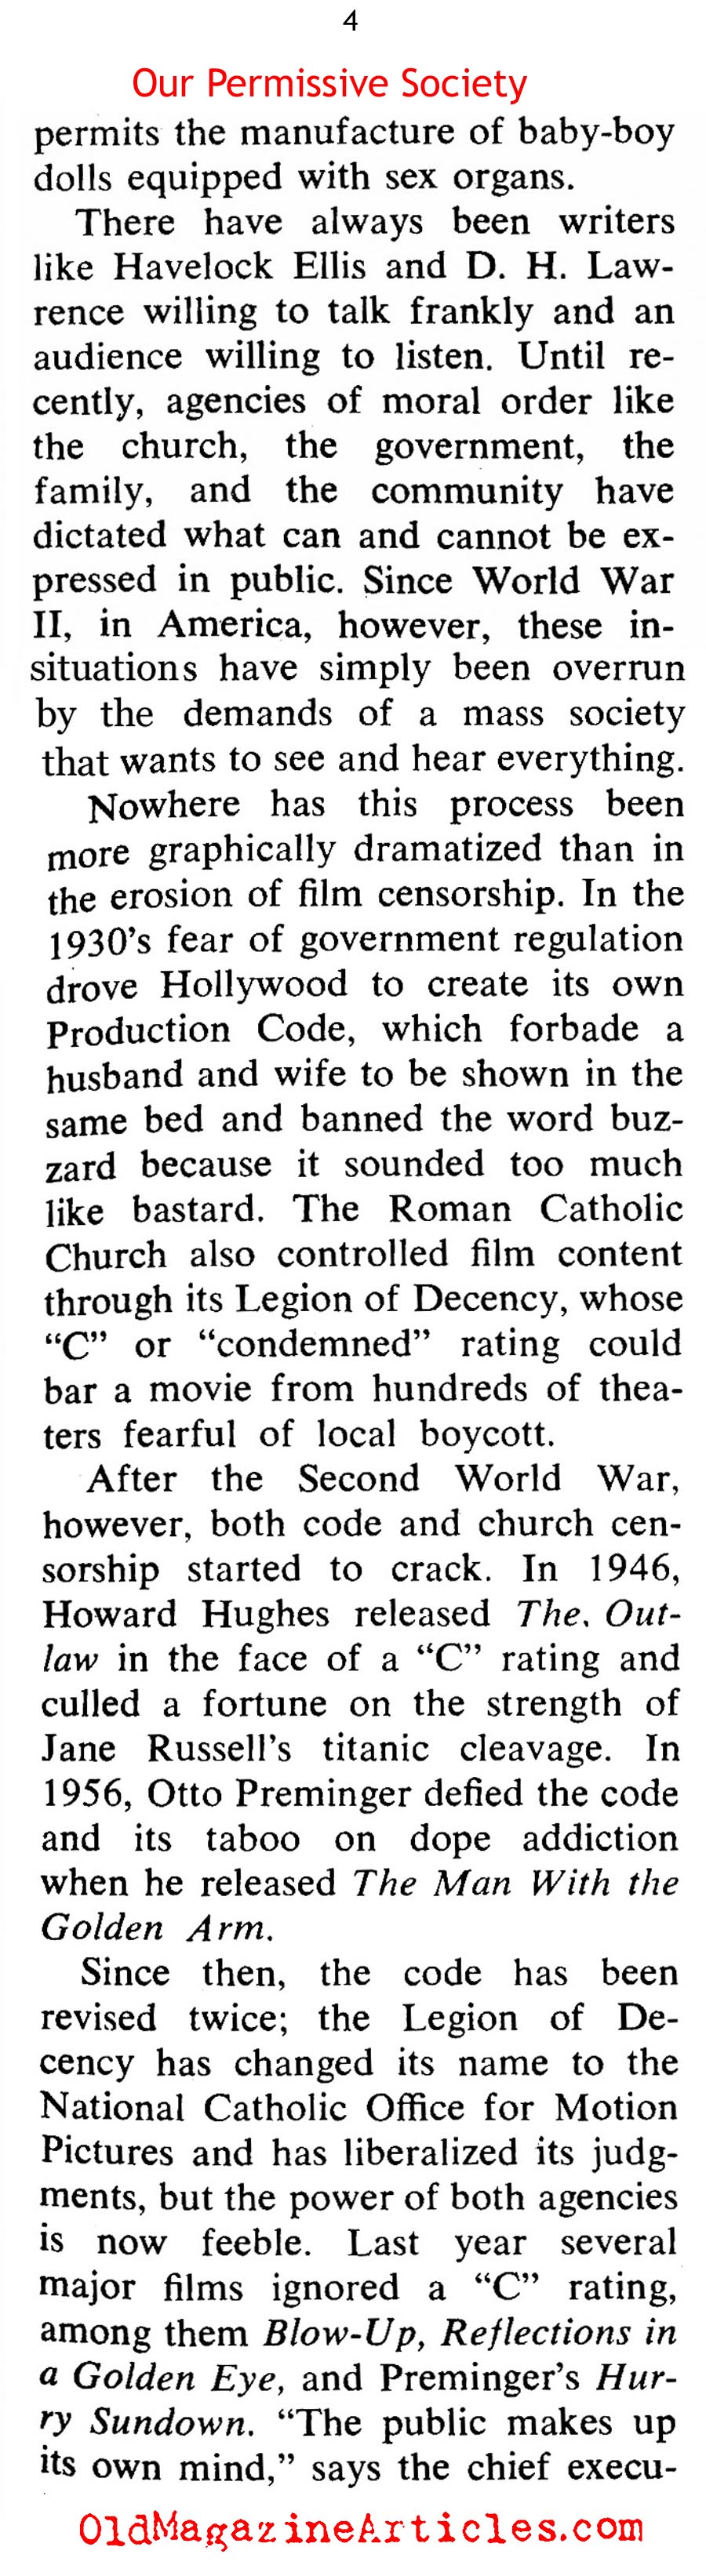 Nudity And Smut Becomes the Norm In American Pop-Culture (Coronet Magazine, 1968)